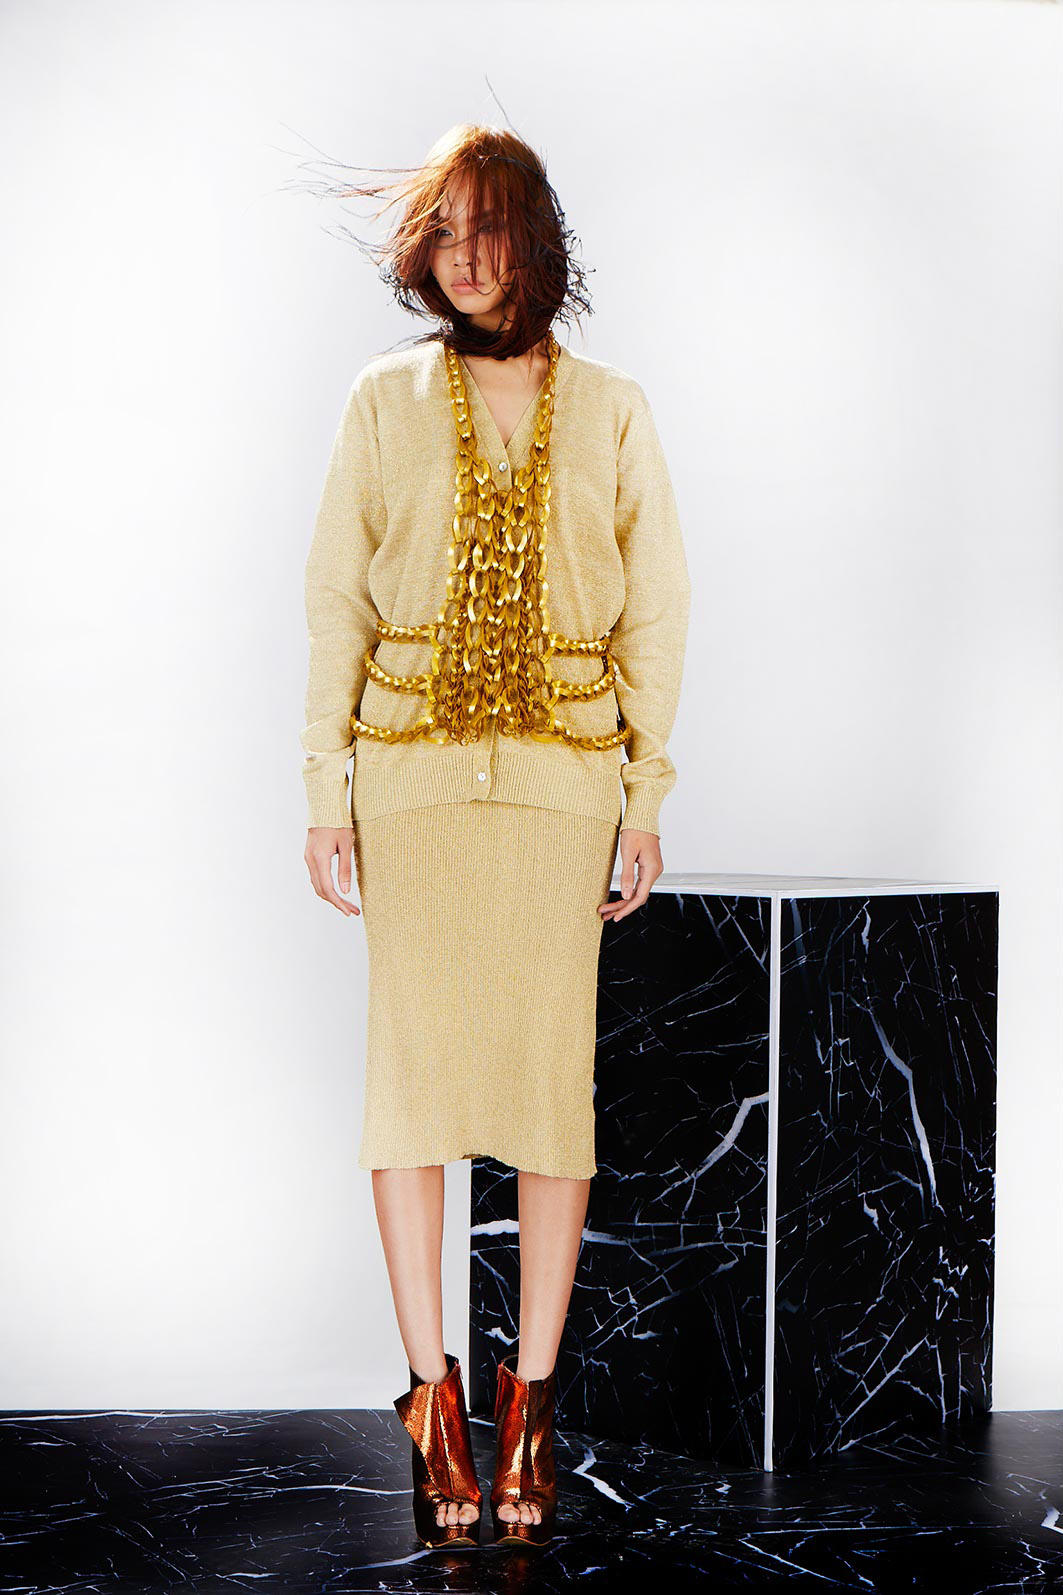 A look from Wonder Anatomie’s autumn-winter 2014-15 collection.